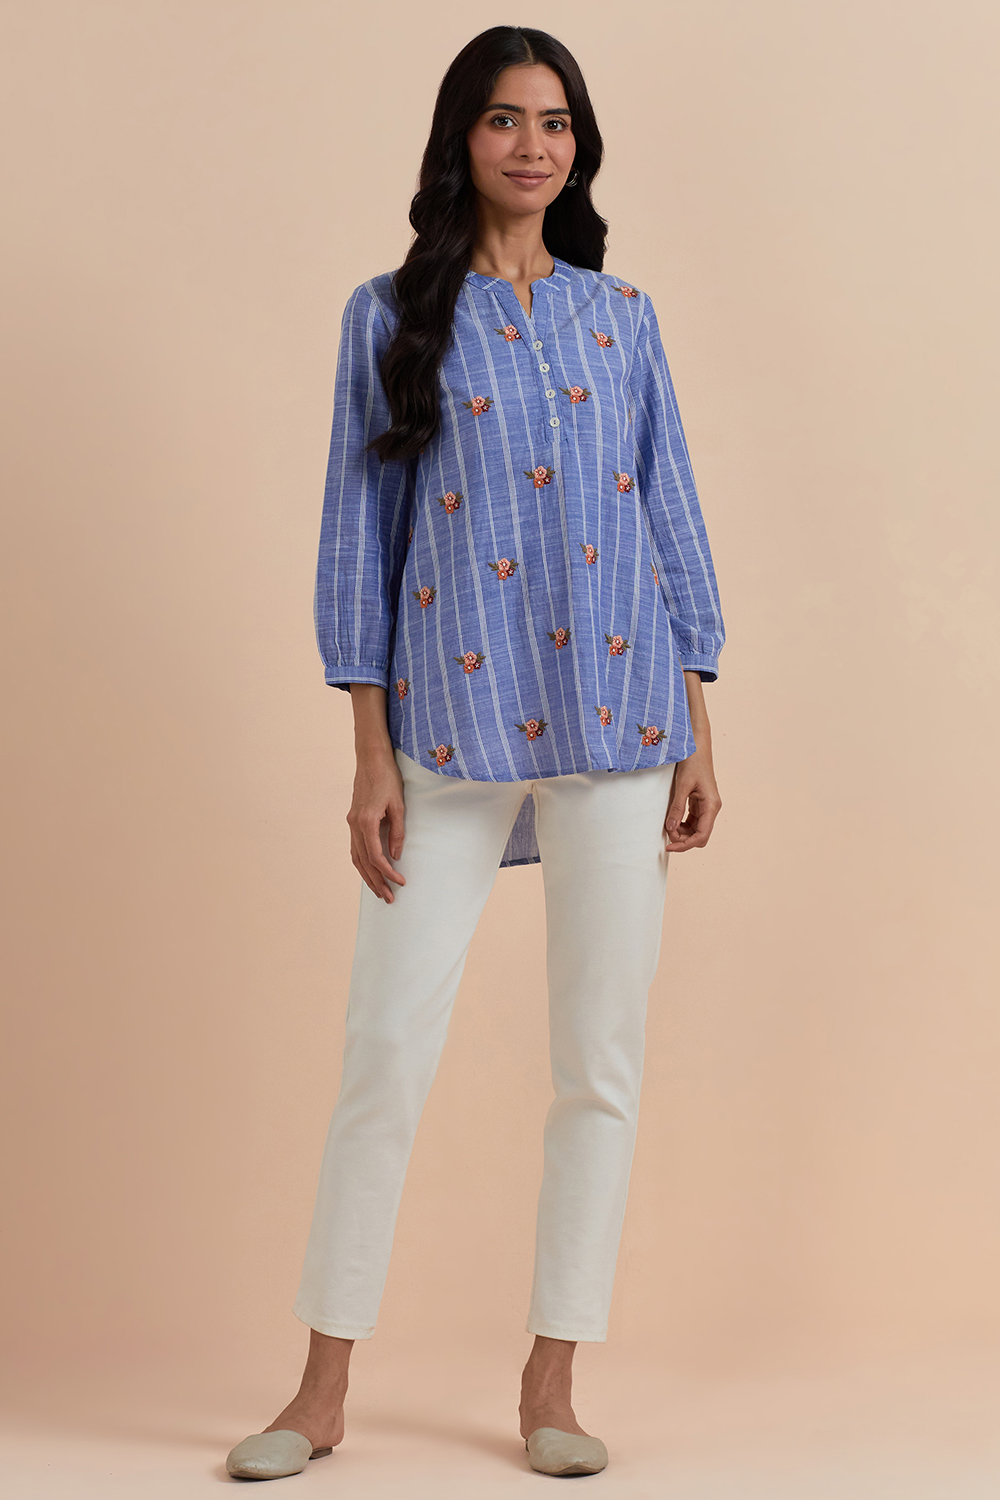 Blue Stripe Cotton Embroidered Top